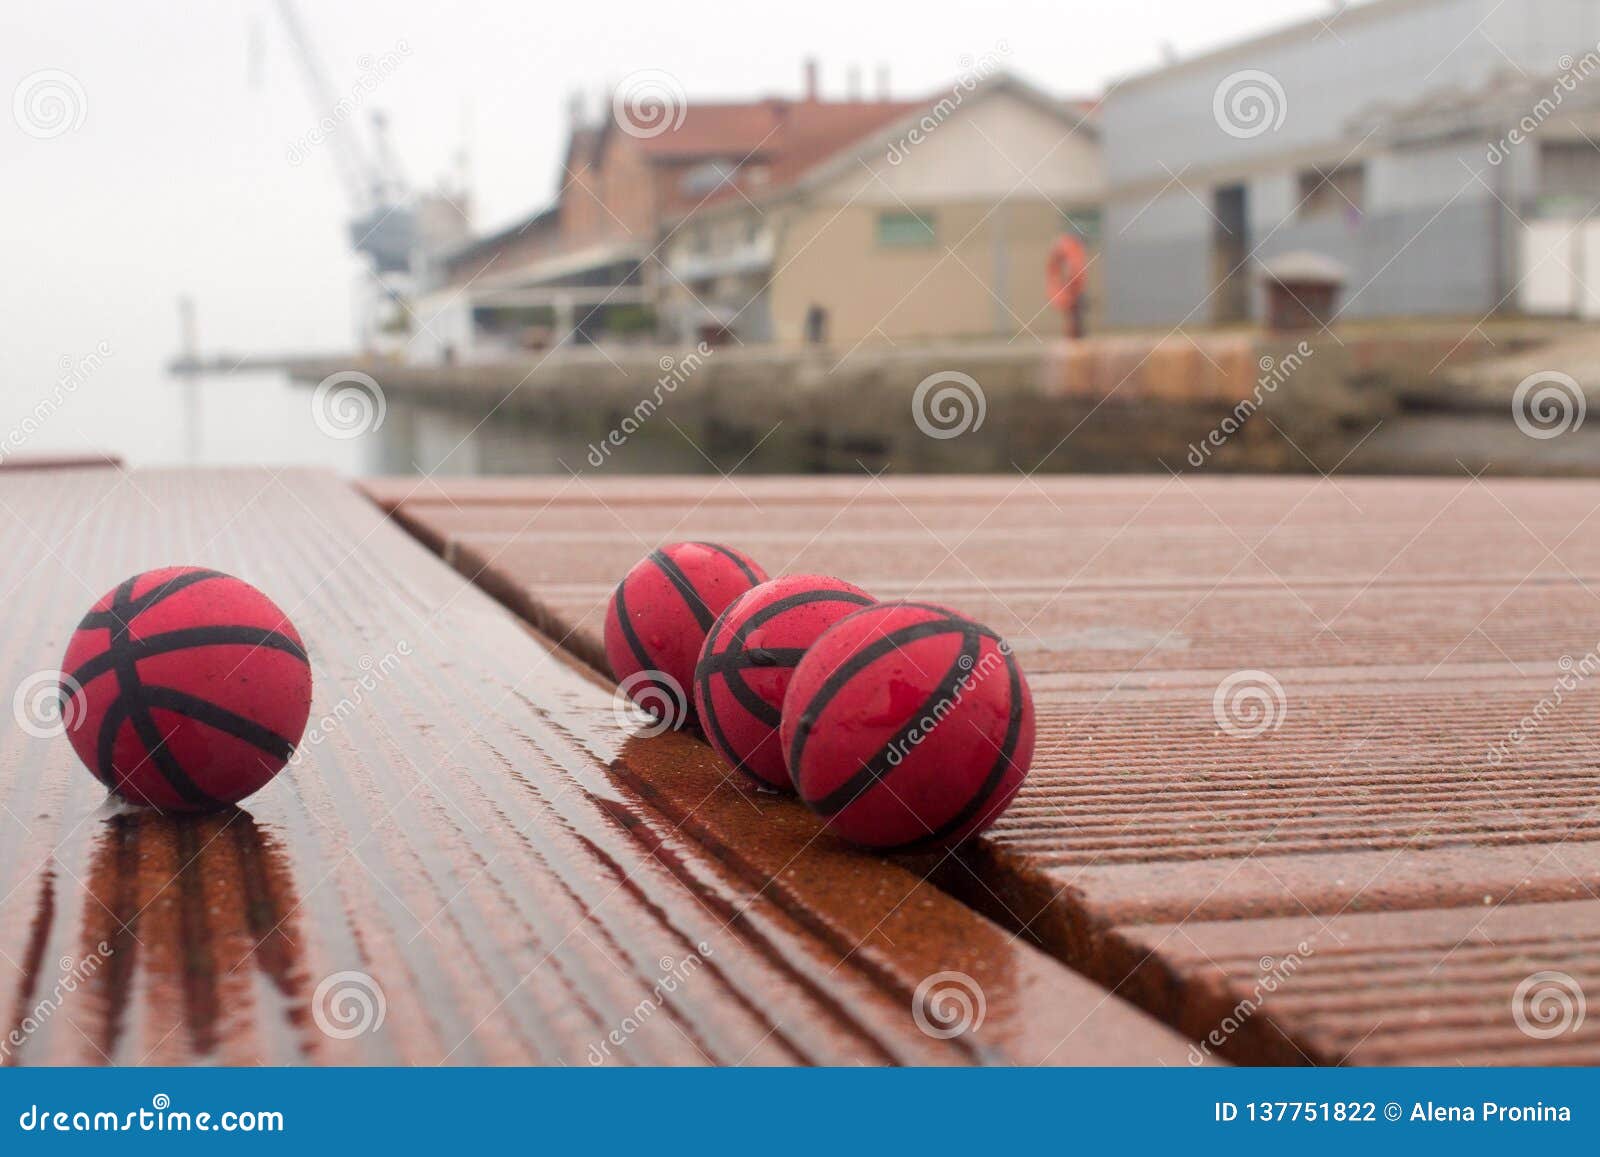 four red basketballs on the panels of the harbor dull day